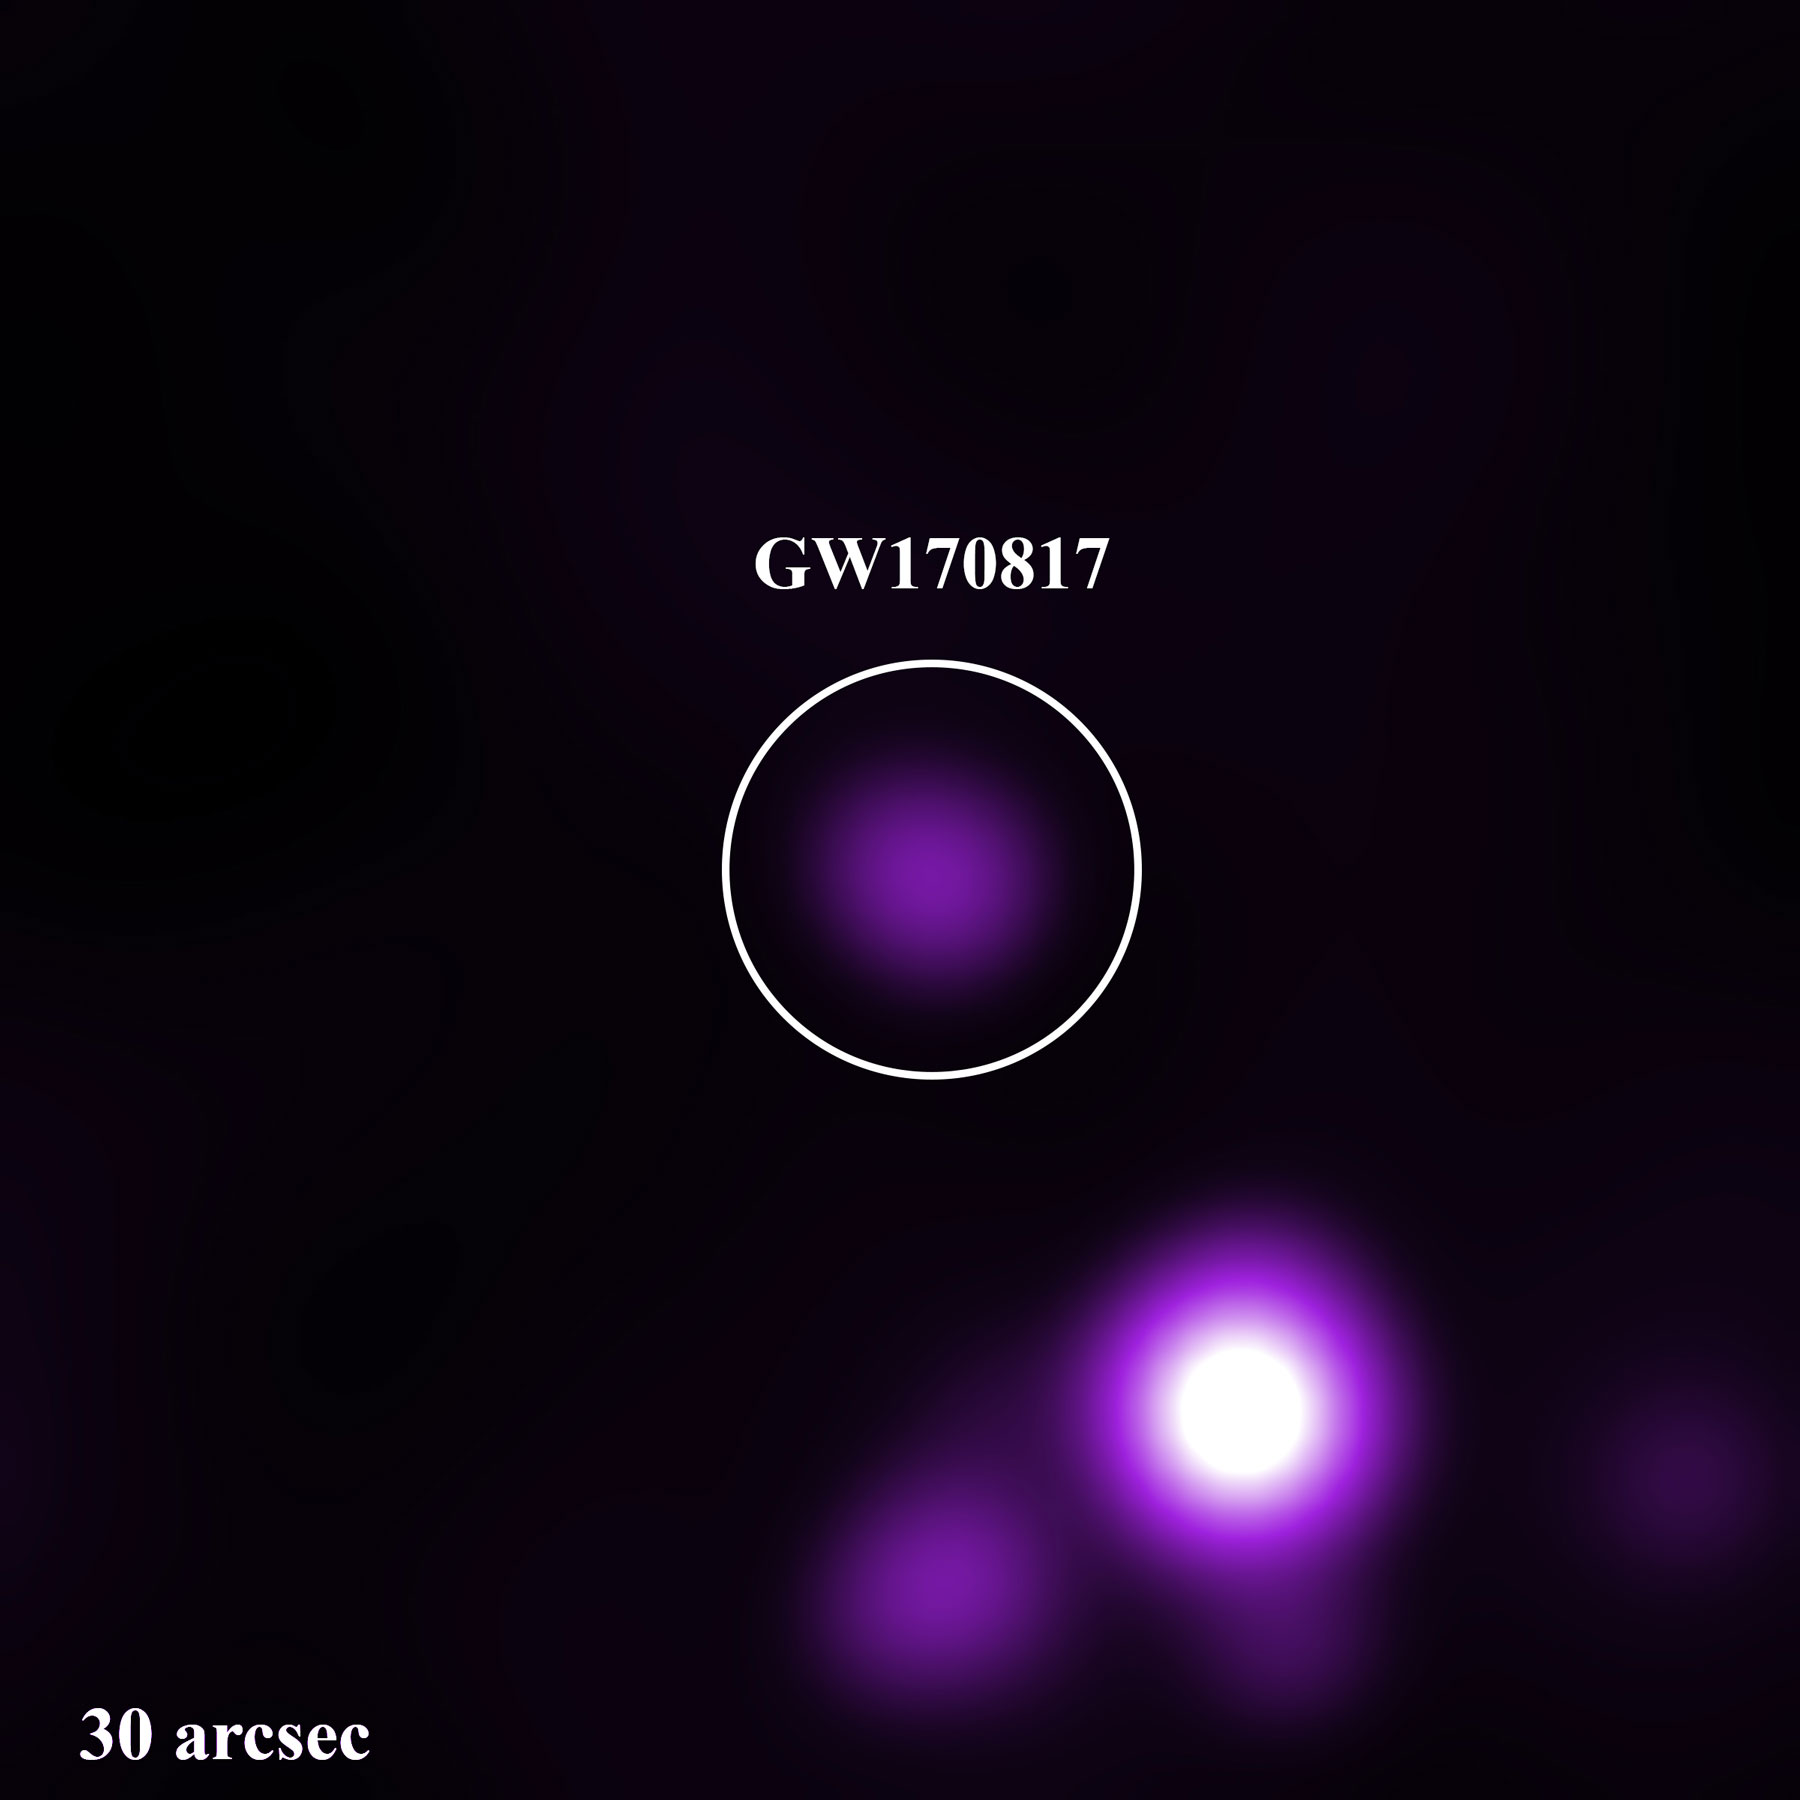 Chandra is now the only observatory still able to detect light – in the form of X-rays -- from GW170817 nearly four years after the original event. The X-rays show the presence of a shock (similar to a sonic boom produced by a plane) in the aftermath of the merger.